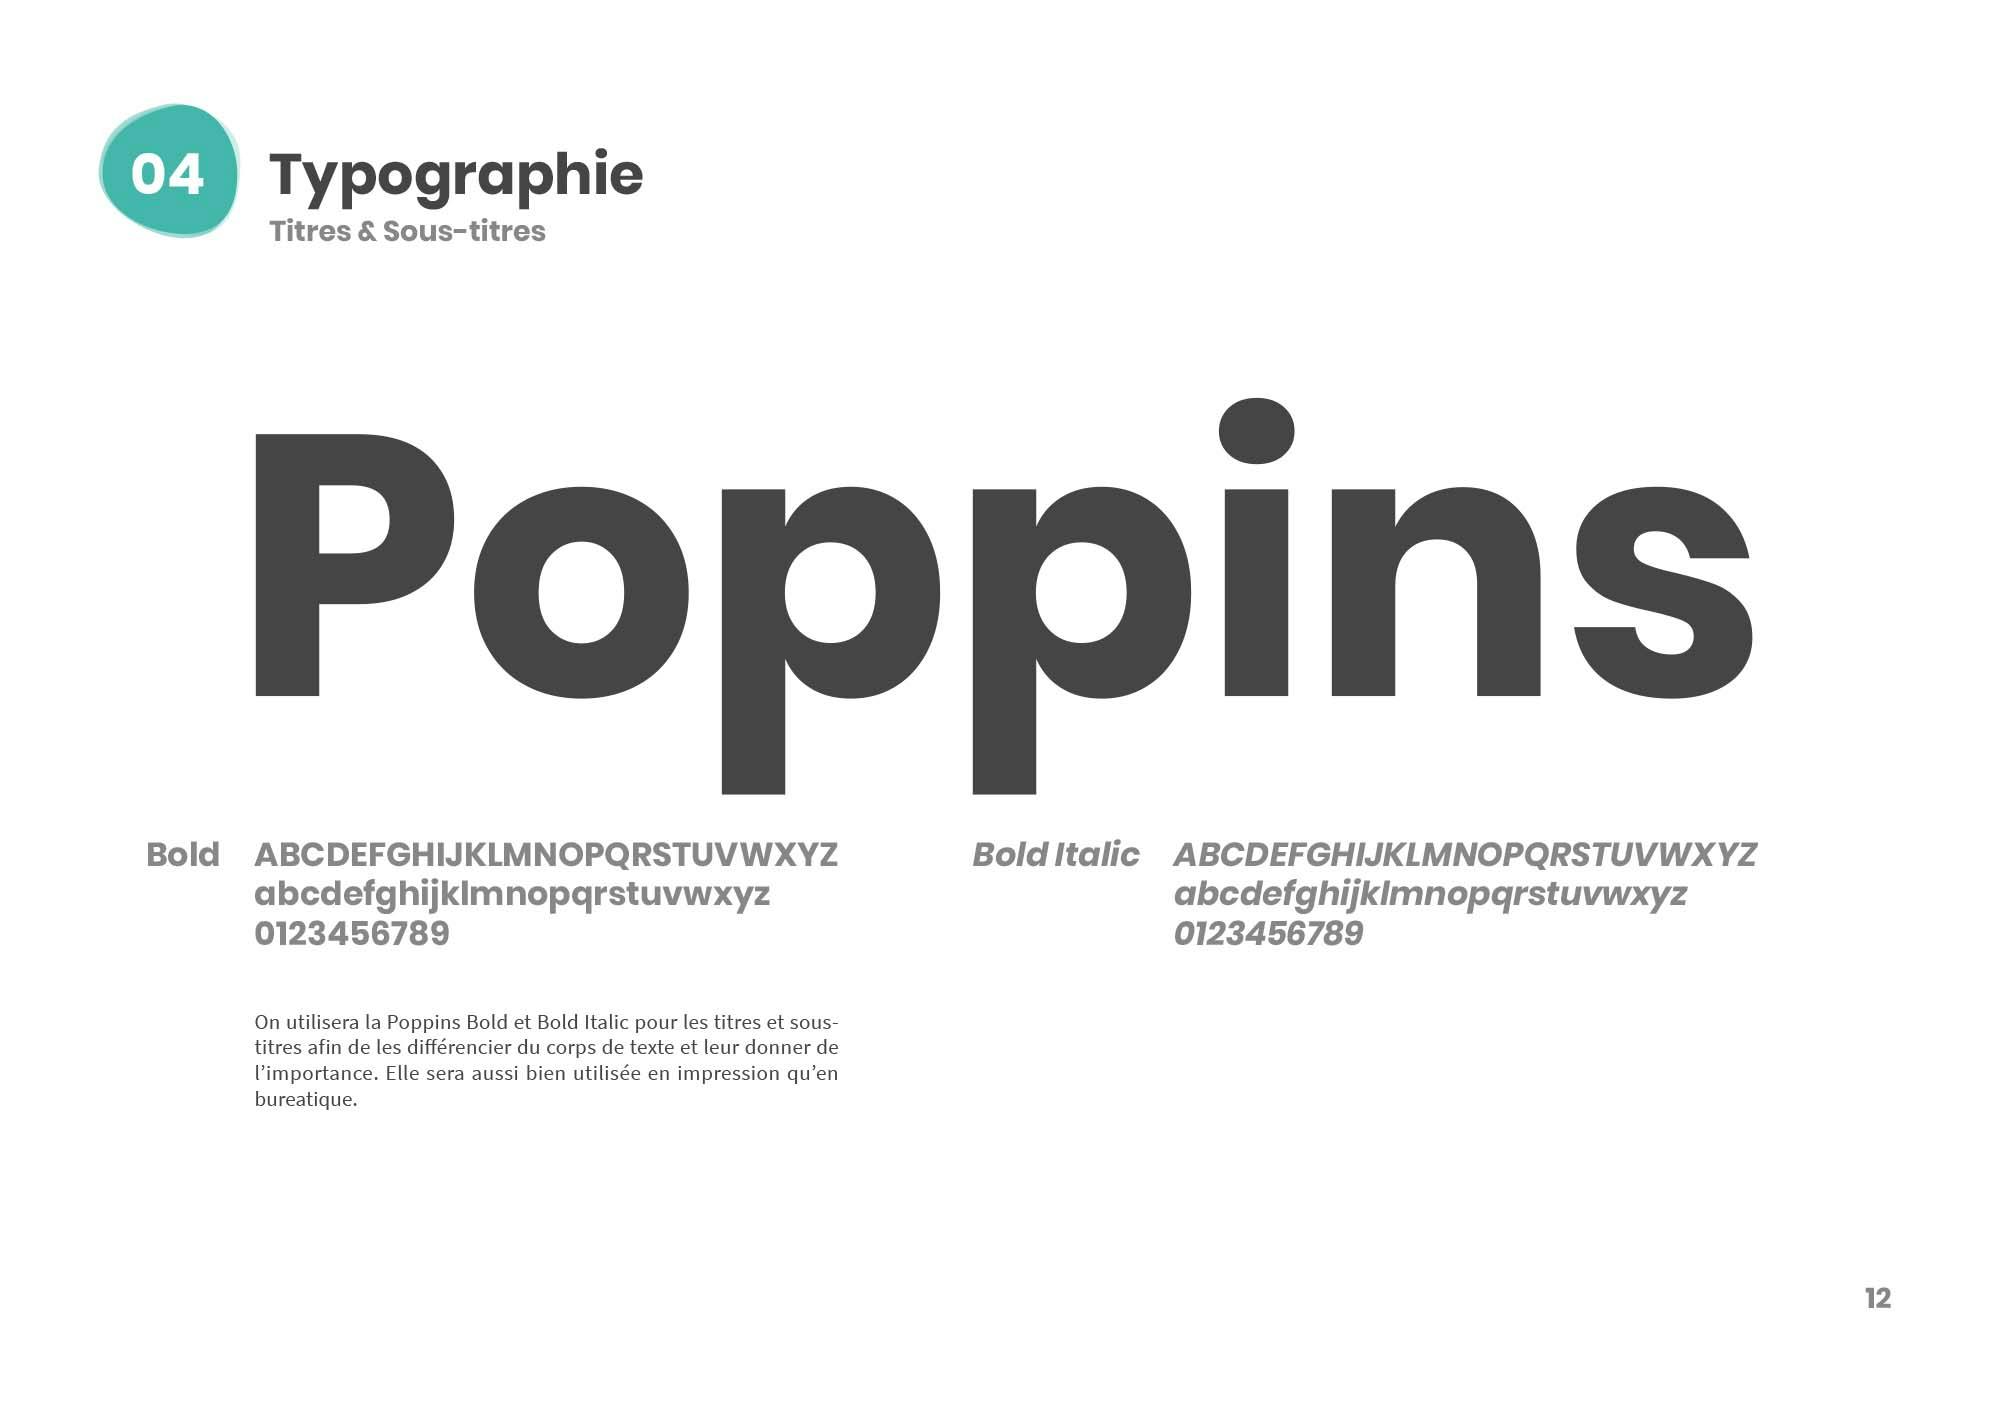 Brand guidelines (Typography)